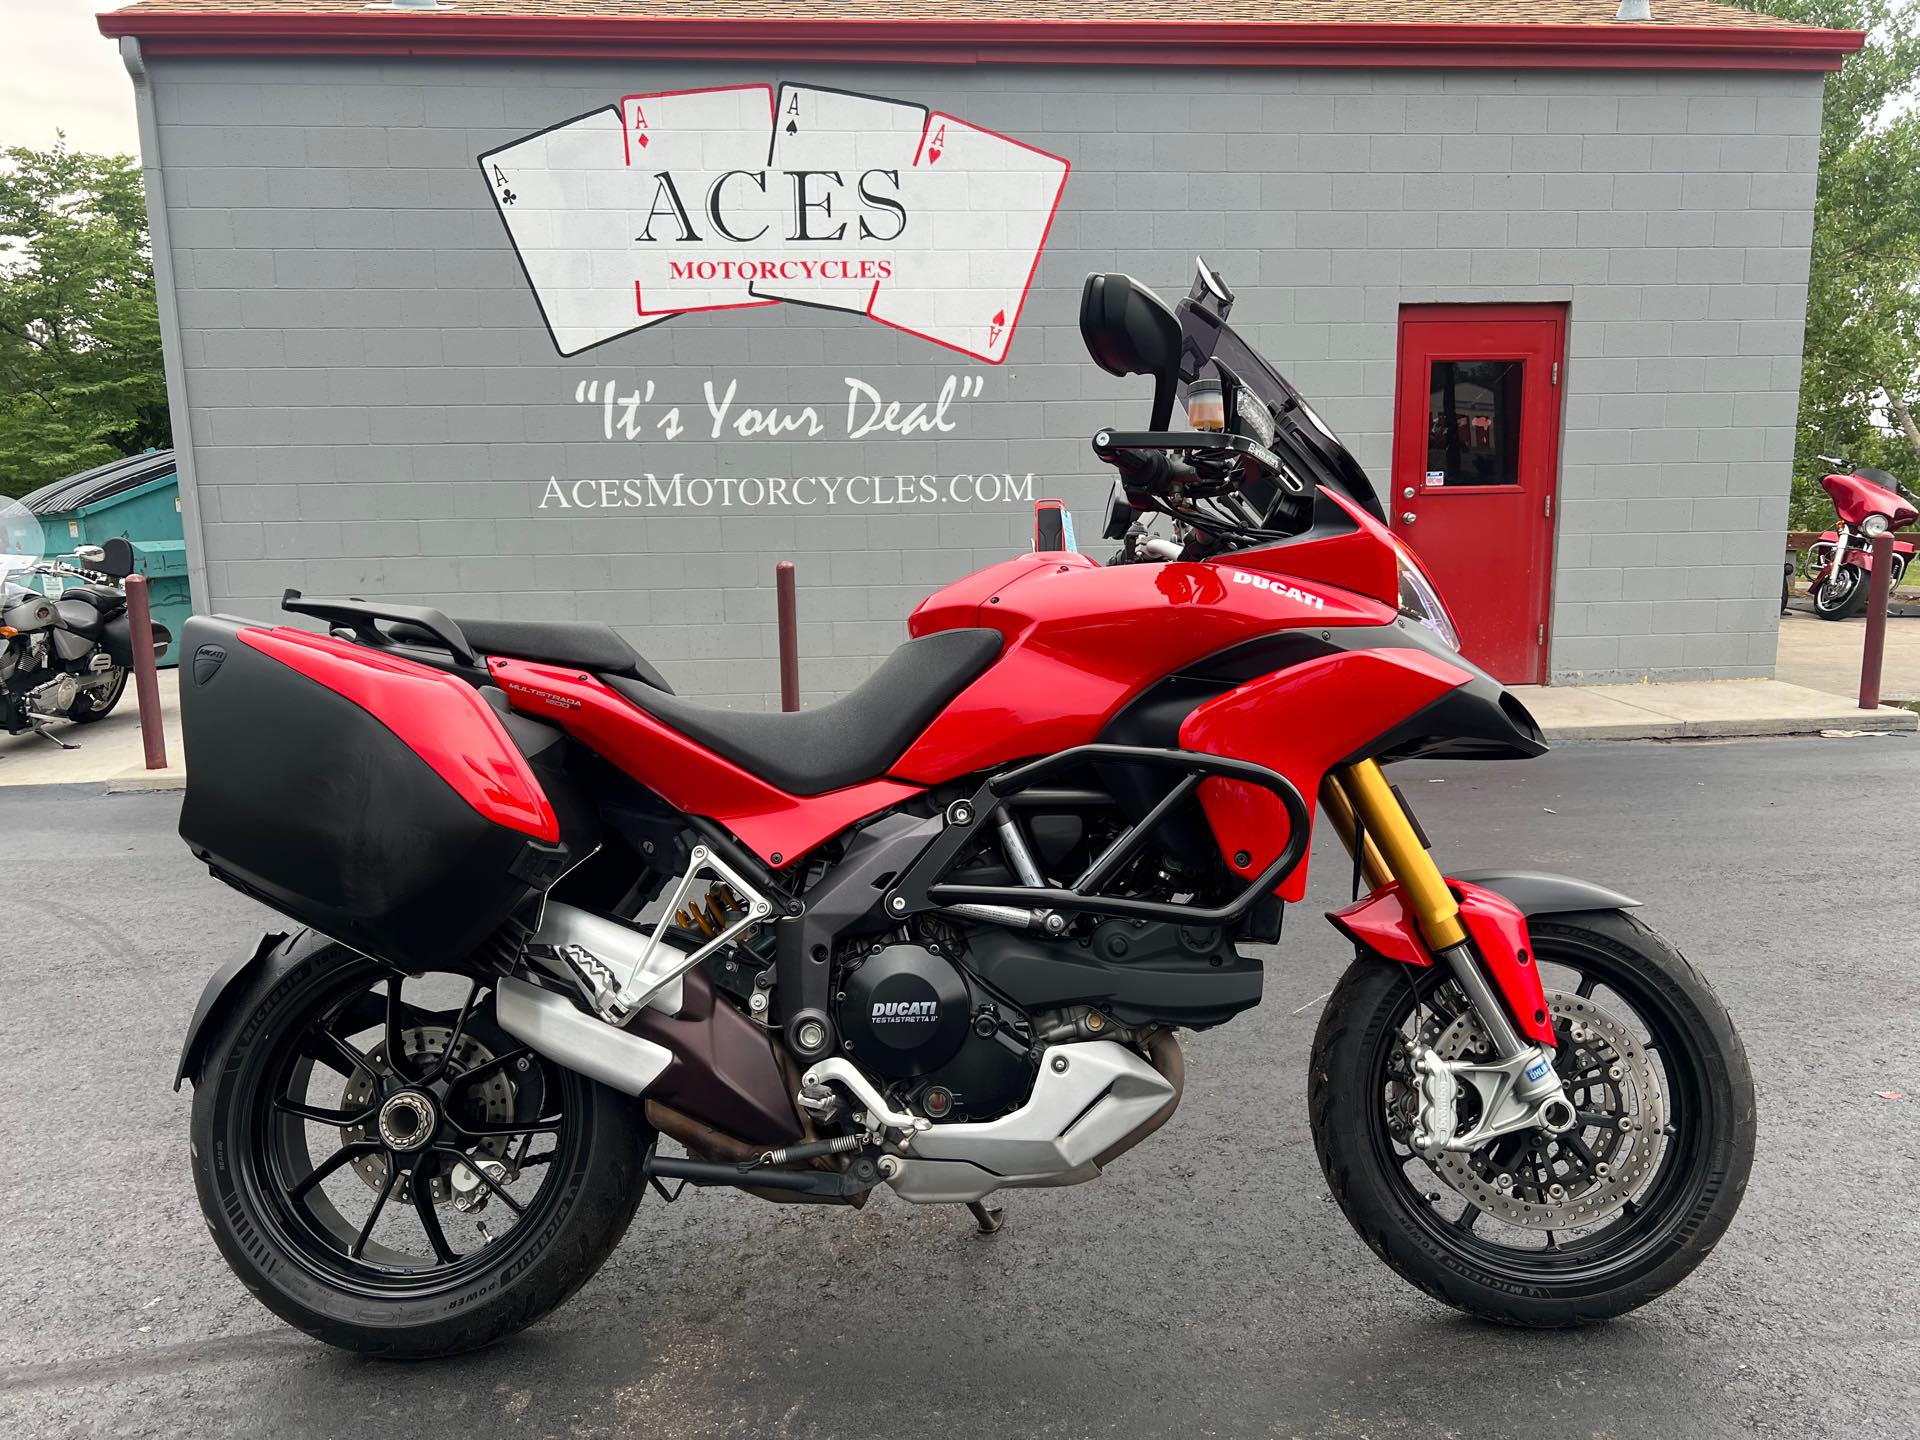 2012 Ducati Multistrada 1200 S Touring Edition at Aces Motorcycles - Fort Collins